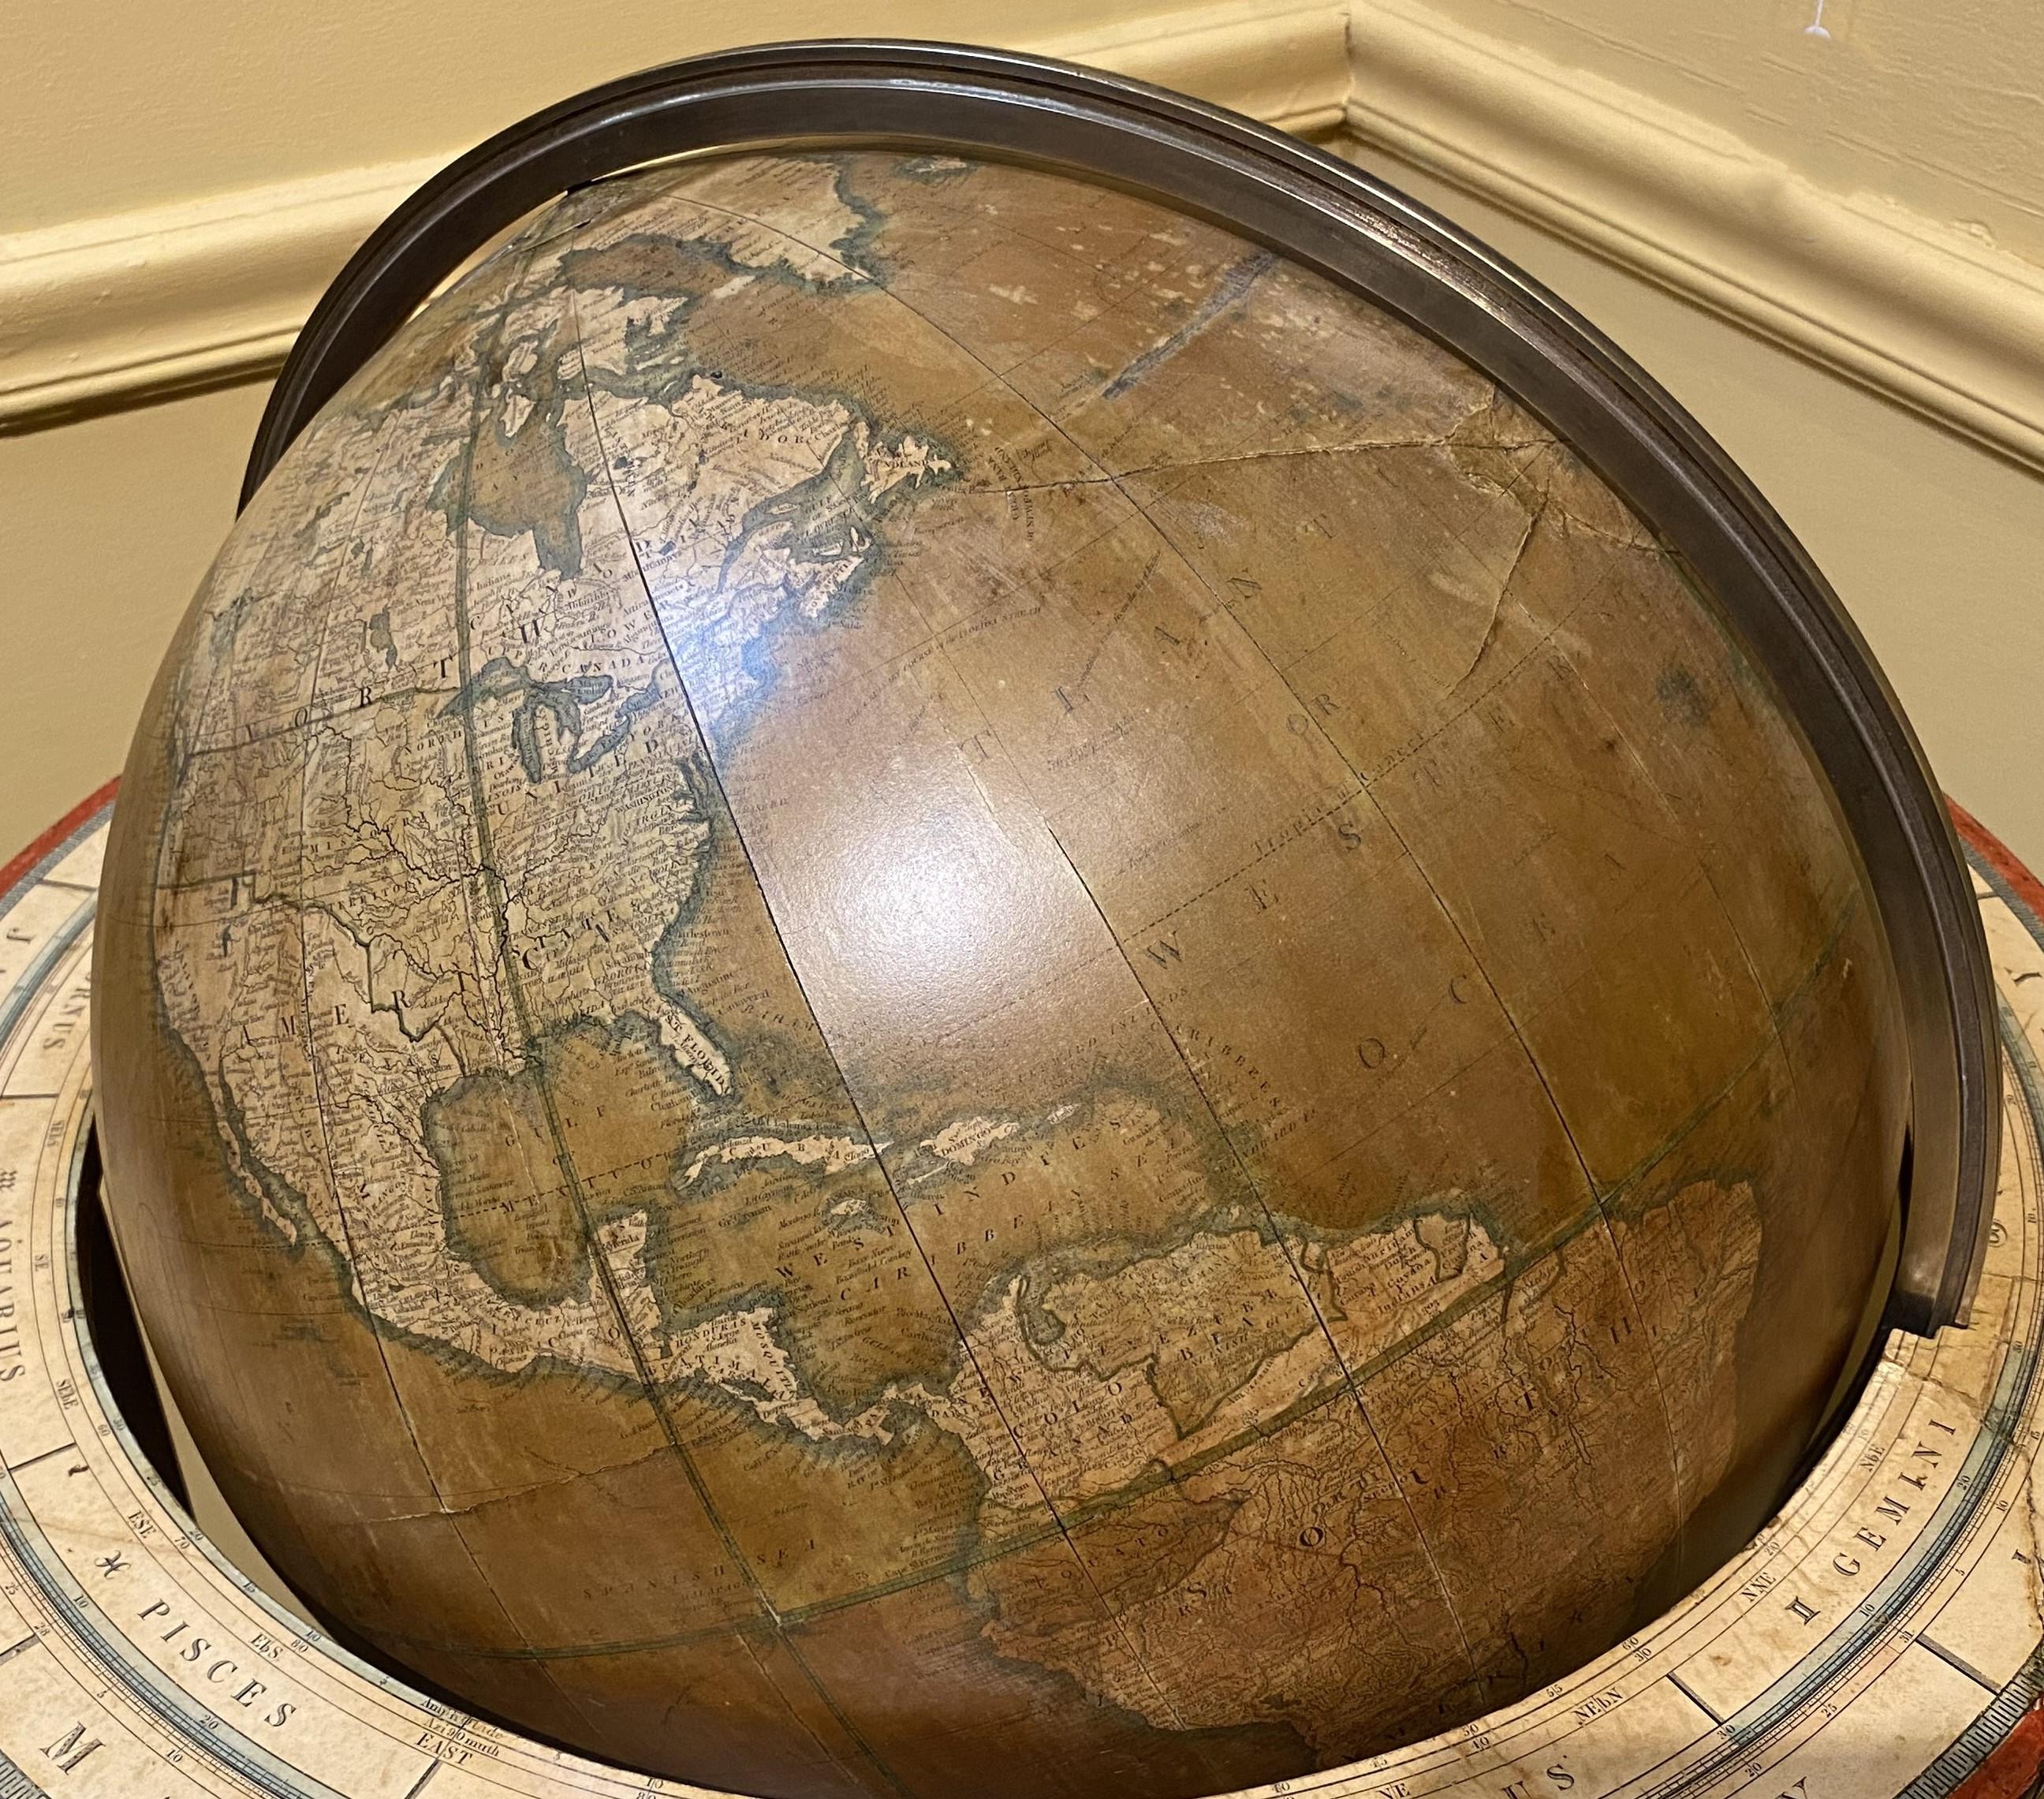 A fine rare example of an 18 inch diameter terrestrial globe on mahogany stand with brass meridian and paper horizon ring depicting months and zodiac signs, The round title cartouche with lions in the crest reads “Smith’s Terrestrial Globe,